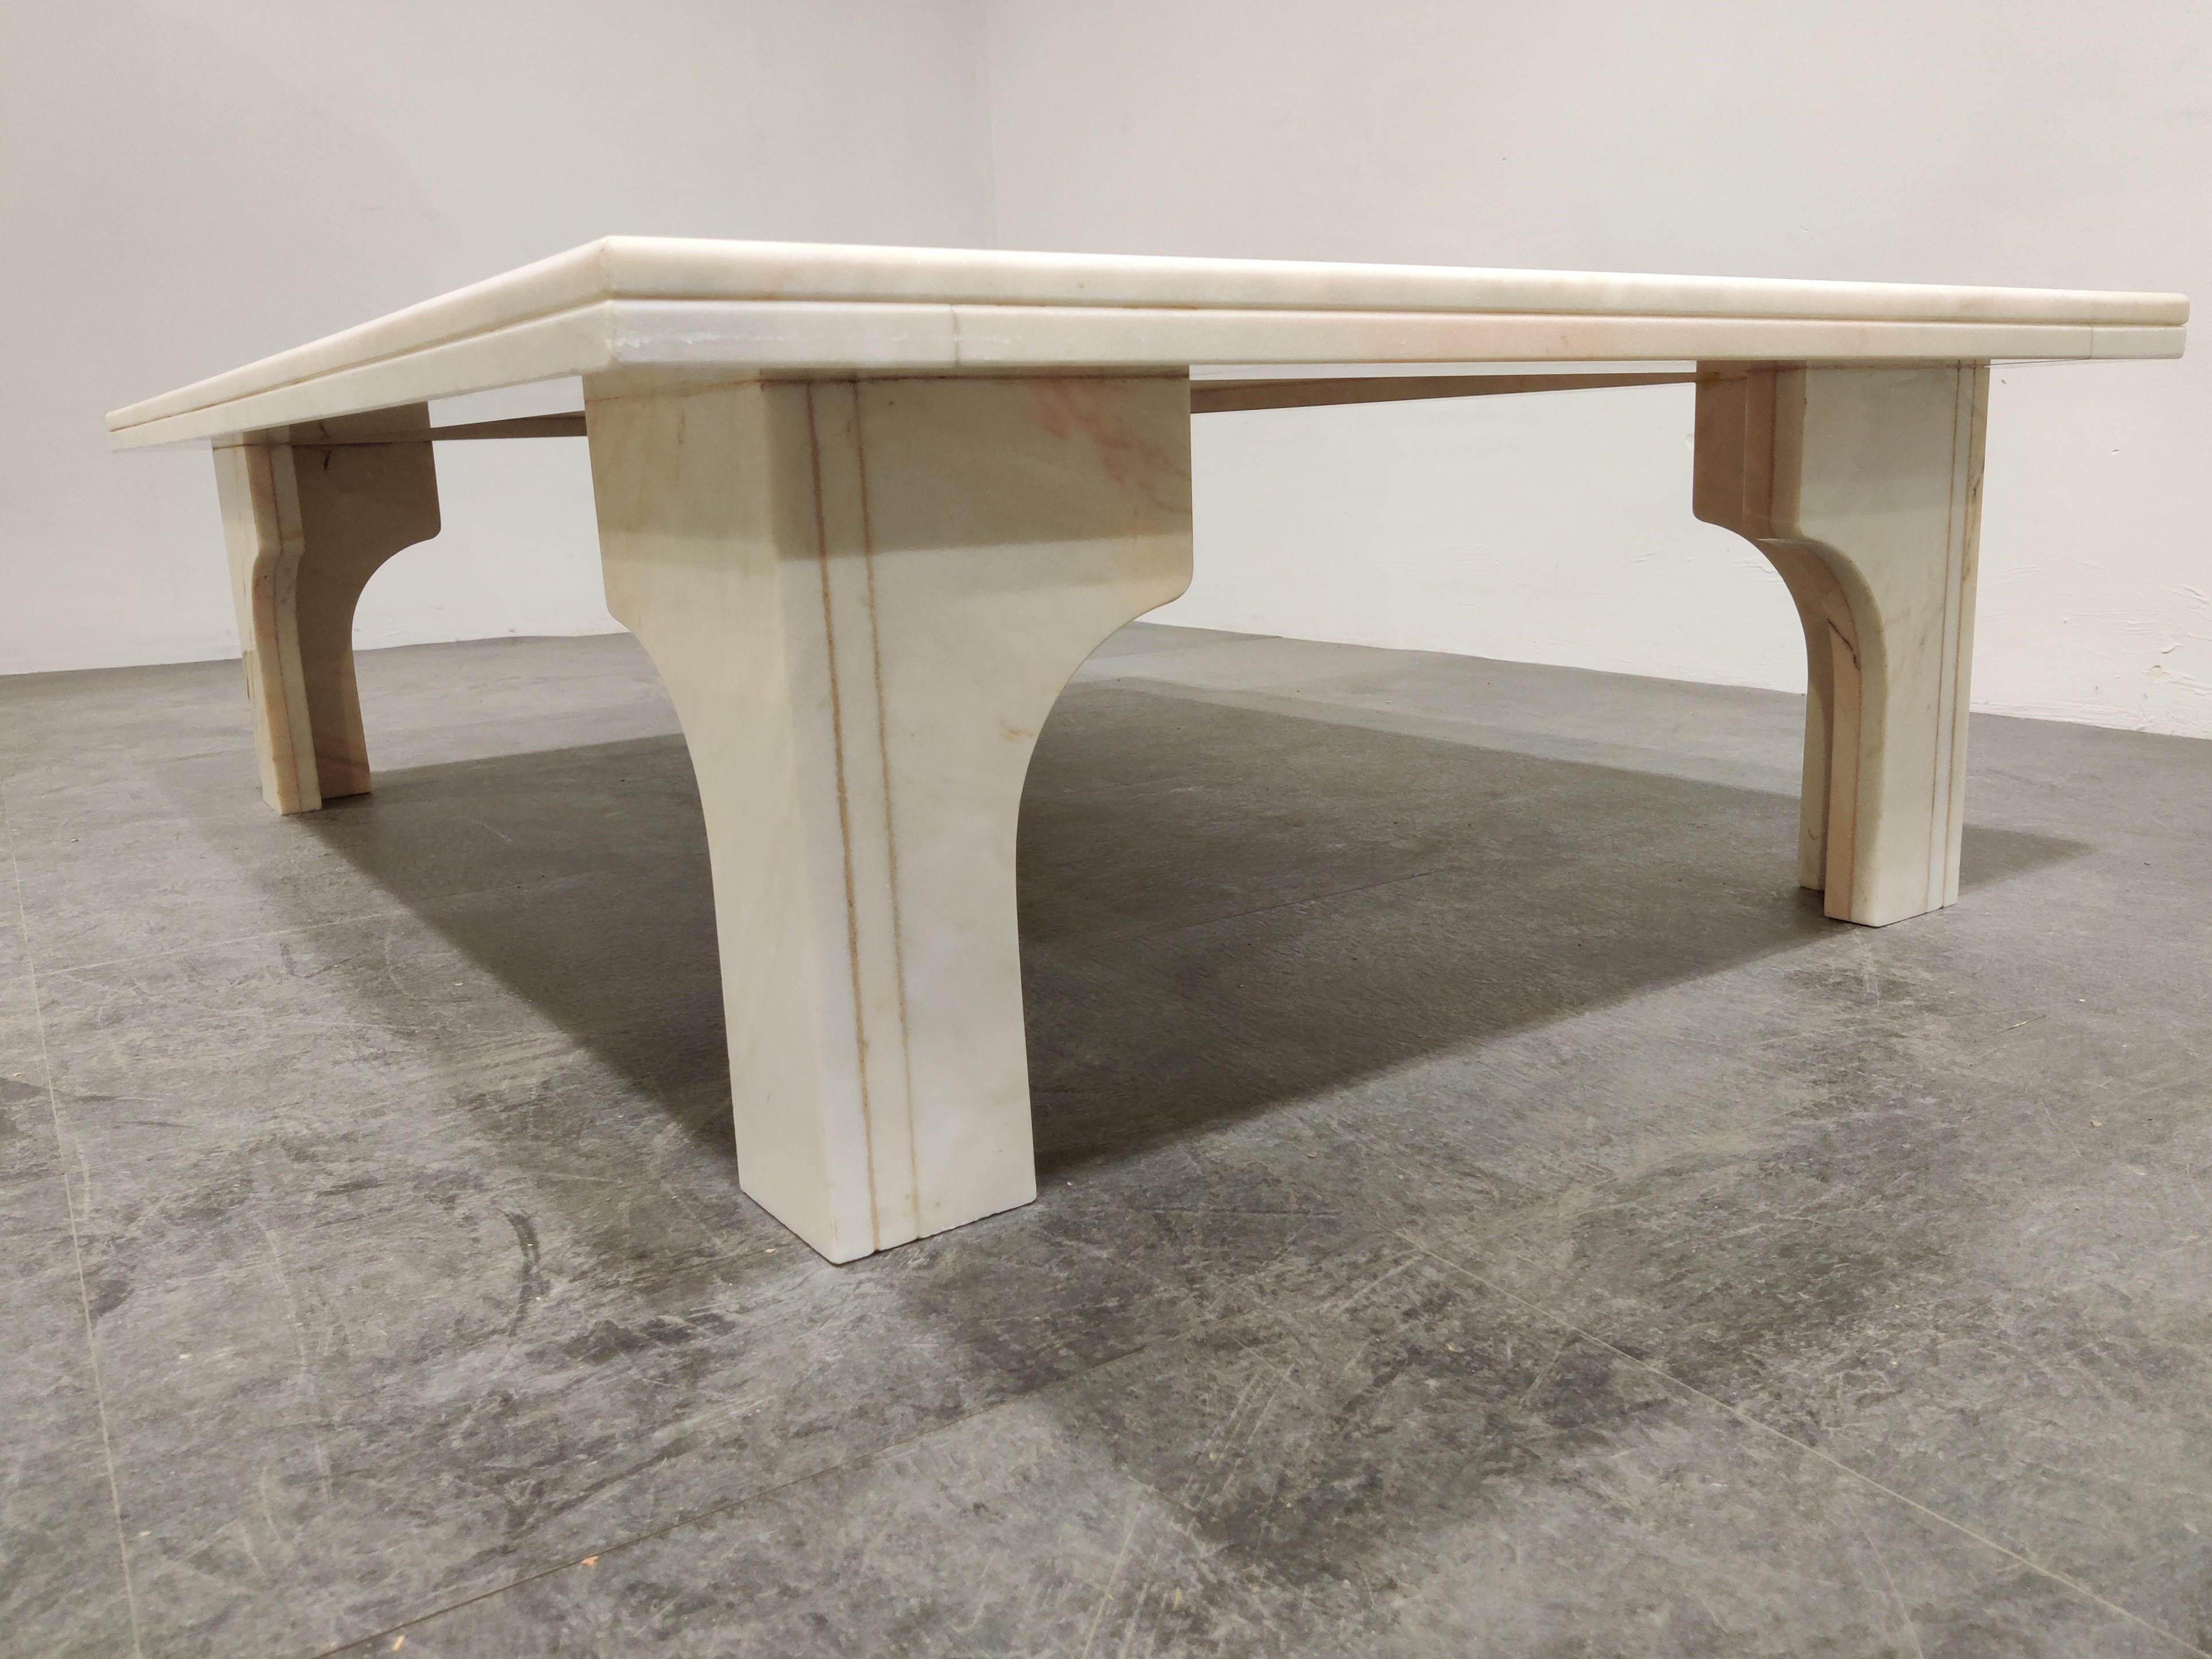 Timeless white marble coffee table with arched legs.

Beautiful thick marble stone tabletop and legs.

Good quality marble with lovely waining, custom made piece for the client back in the days and was made locally in Belgium.

Very good